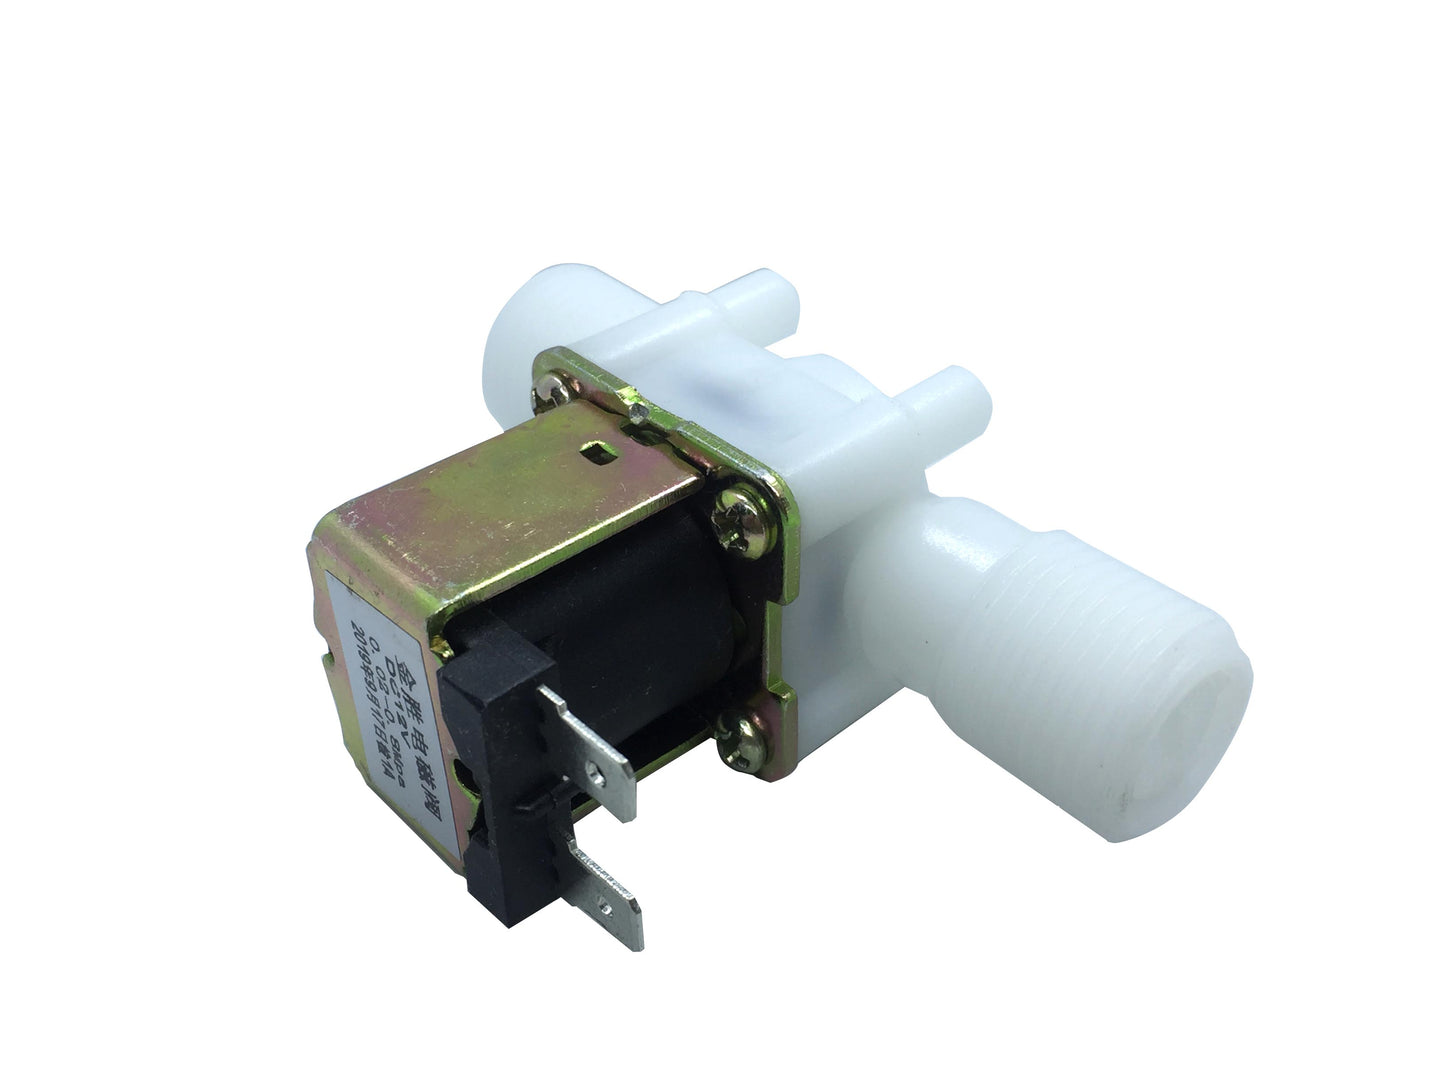 Solenoid Water Valve Plastic Normally Closed